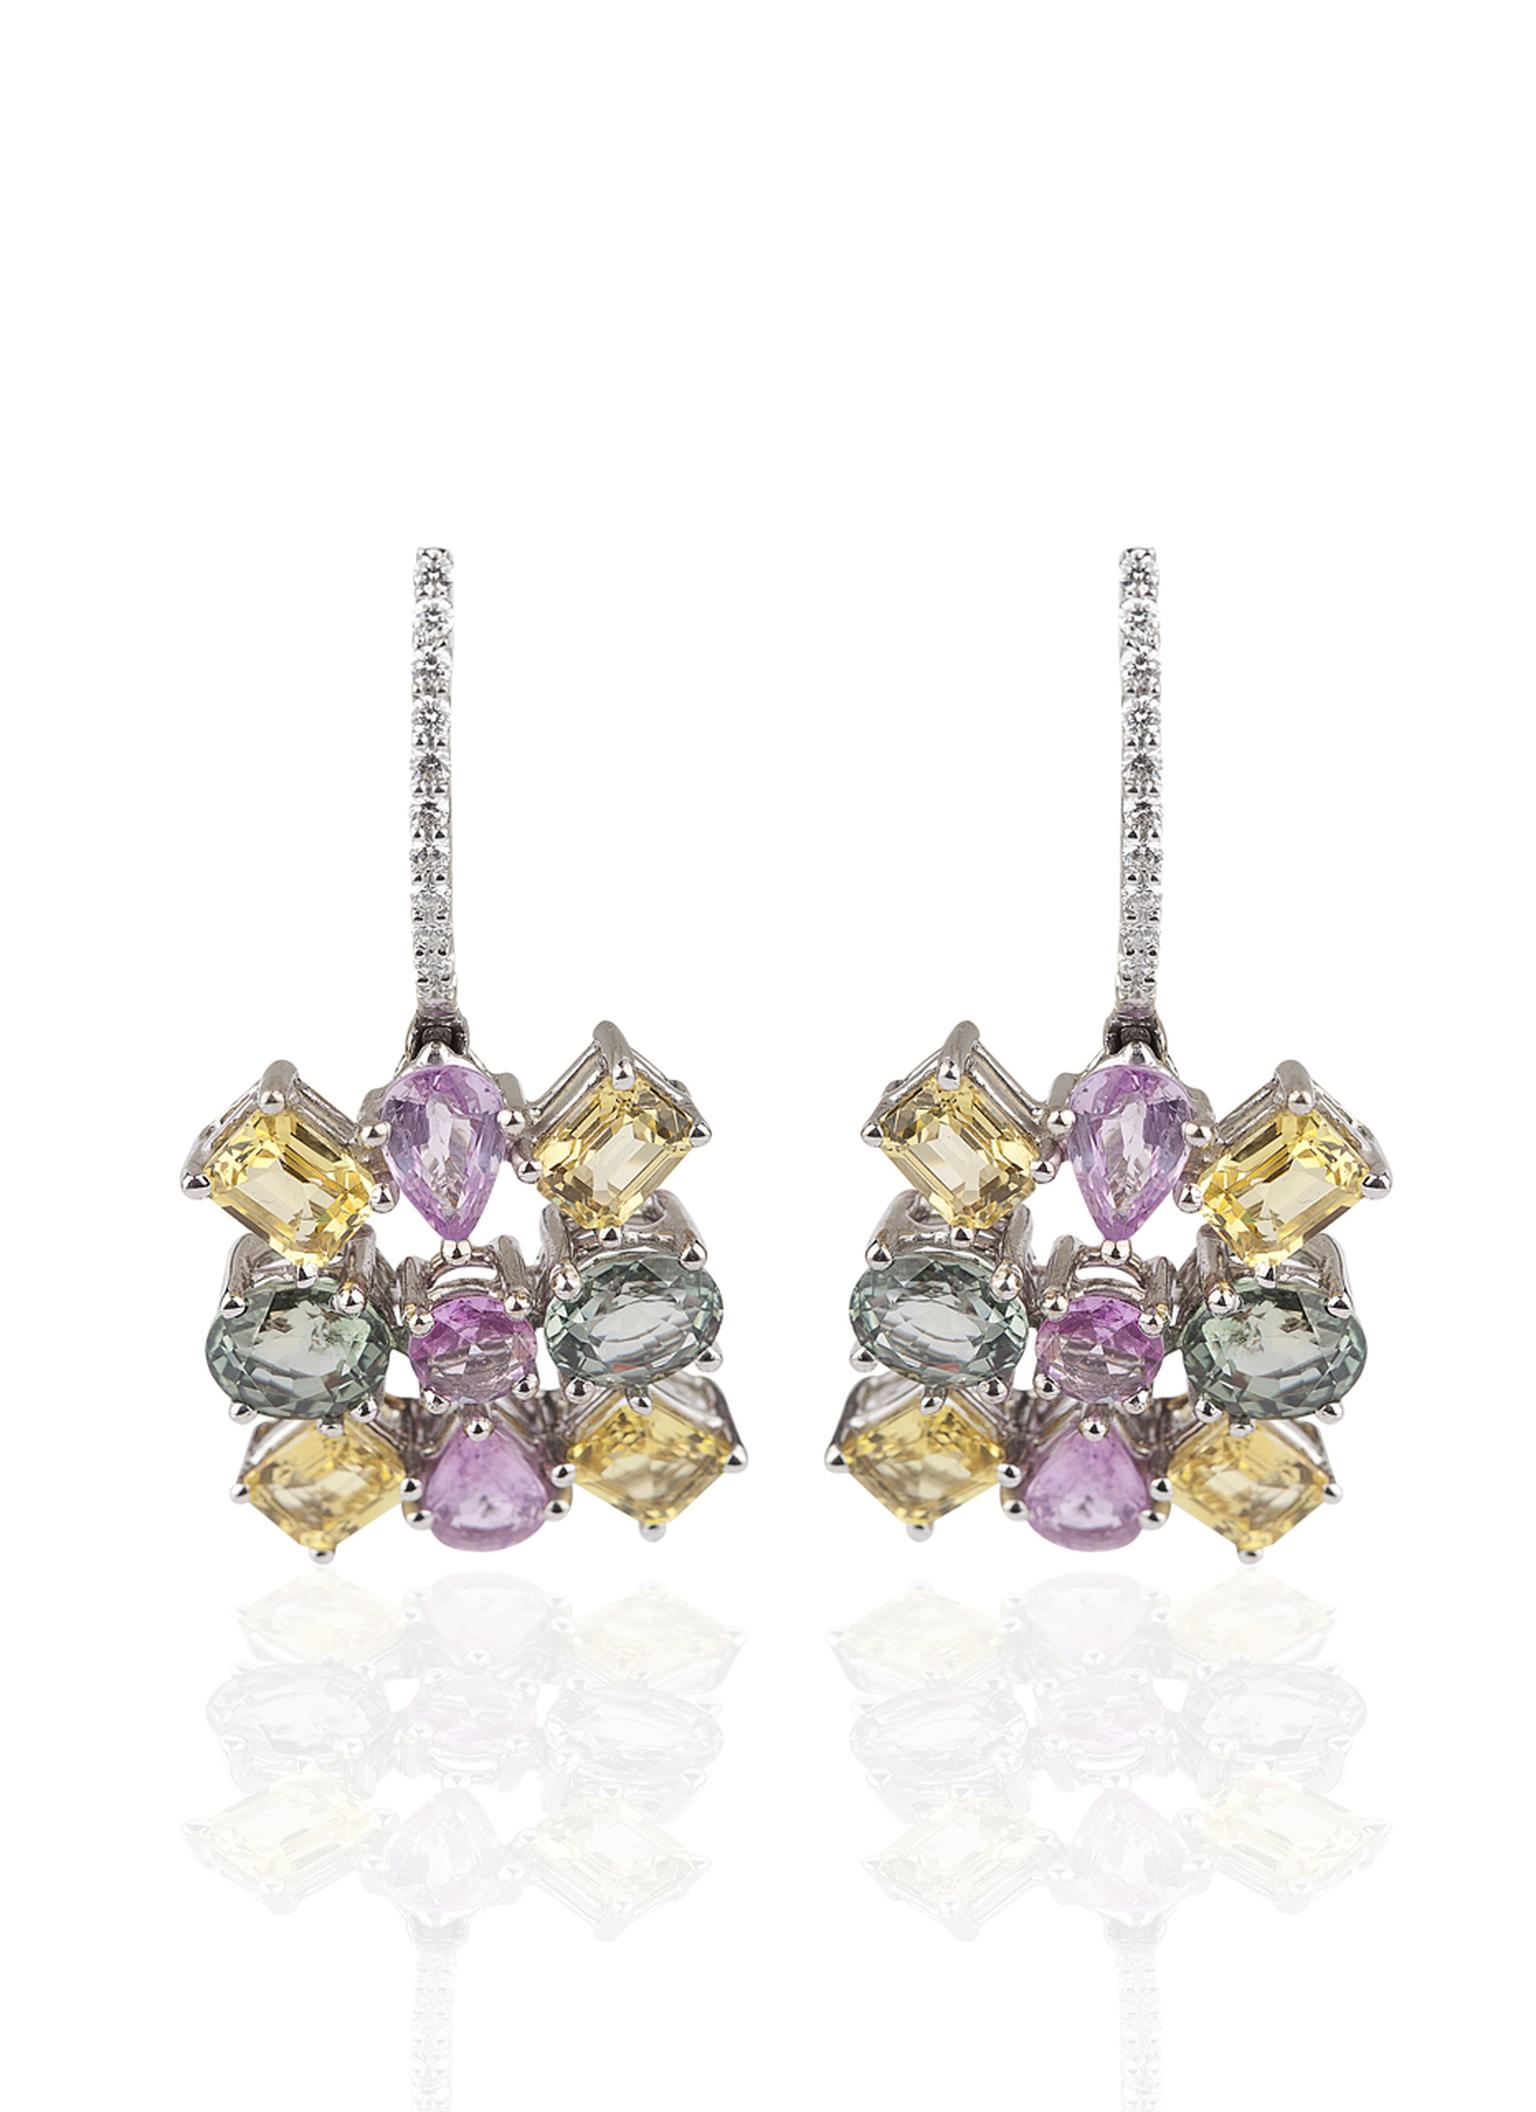 Mirari white gold Water fall earrings featuring pear and marquise cut multi-coloured sapphires and round white diamonds.